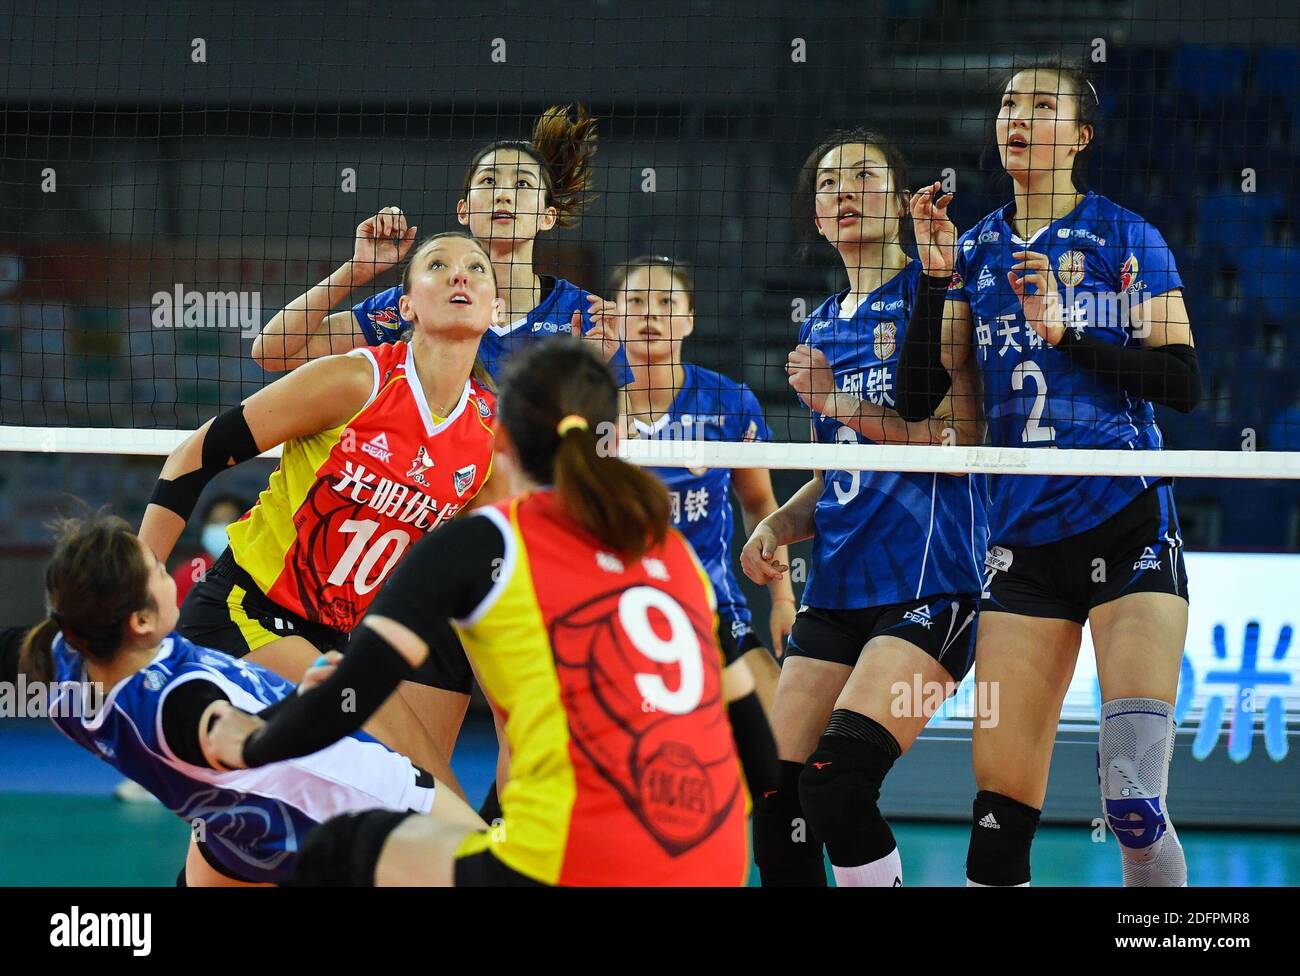 Jiangmen, China's Guangdong Province. 6th Dec, 2020. Players of both sides compete during the Goup D match between Shanghai team and Jiangsu team at the thrid stage of the 2020-2021 season Chinese Women's Volleyball Super League in Jiangmen, south China's Guangdong Province, Dec. 6, 2020. Credit: Liu Dawei/Xinhua/Alamy Live News Stock Photo